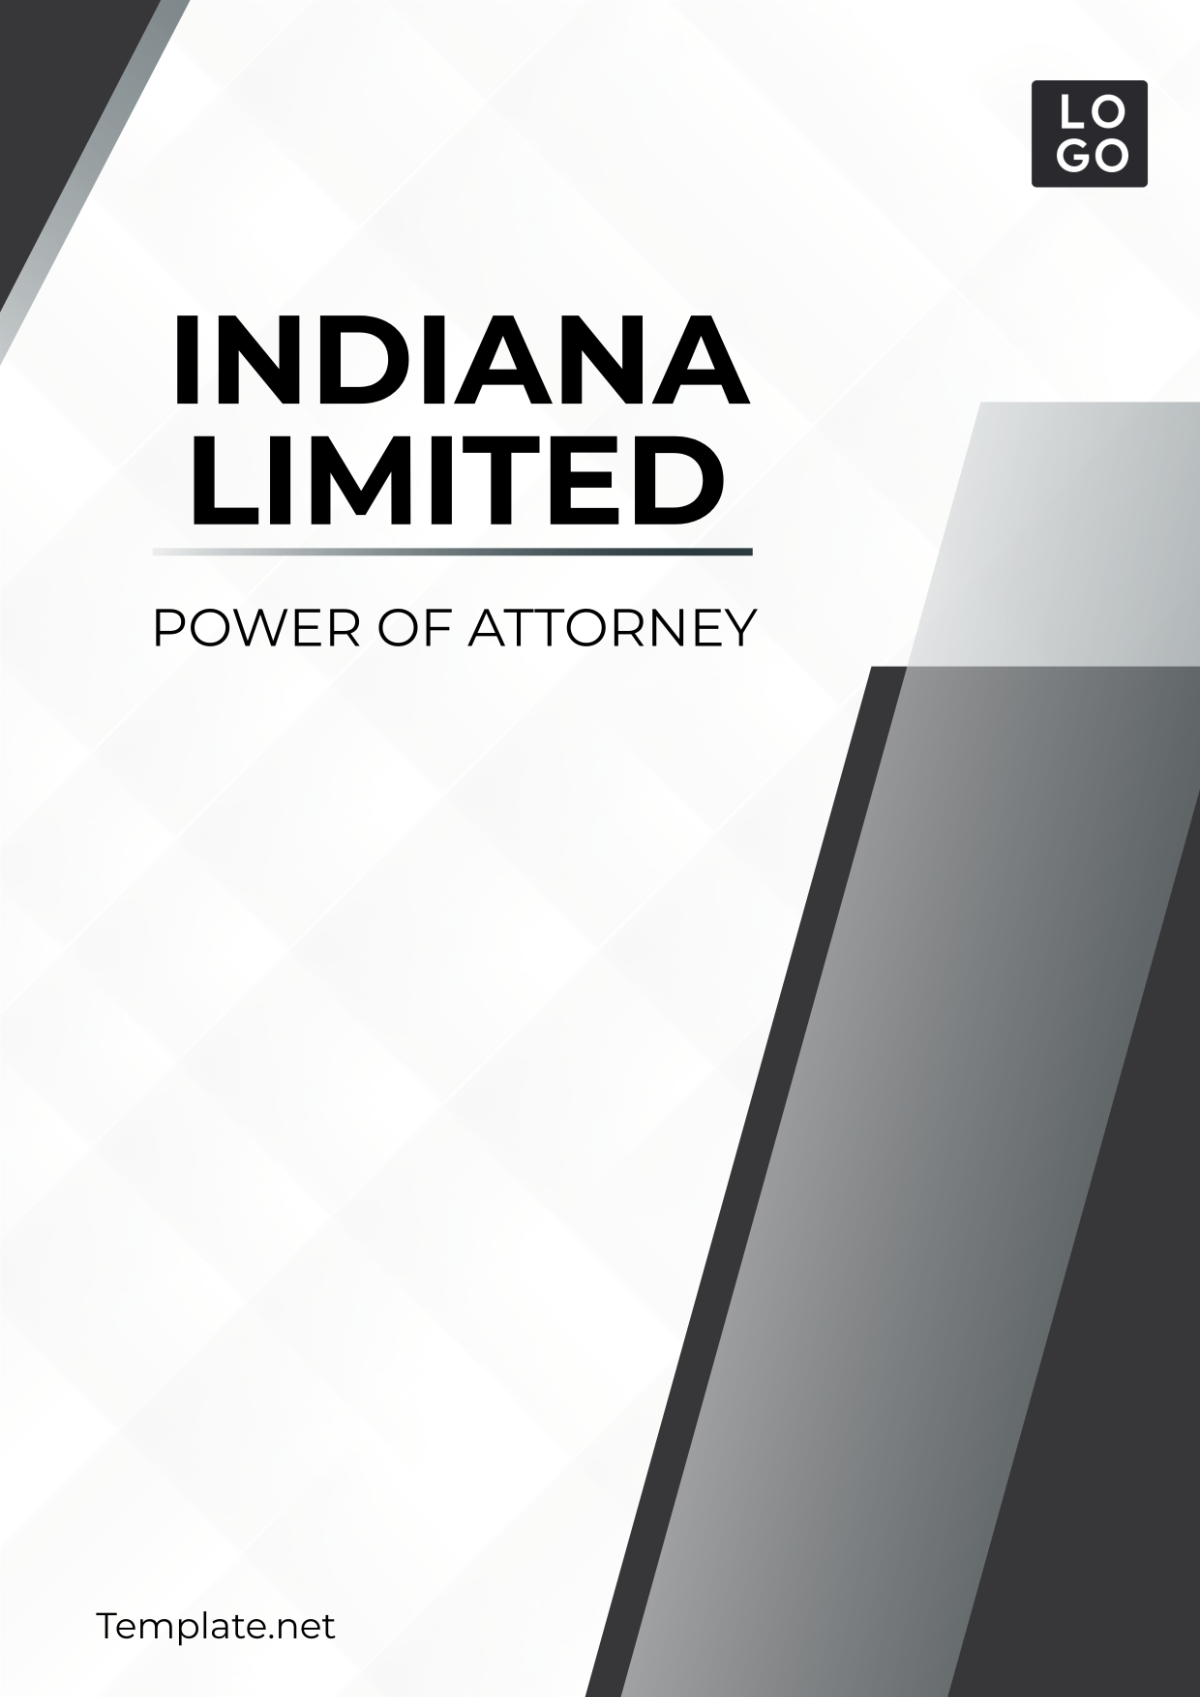 Indiana Limited Power of Attorney Template